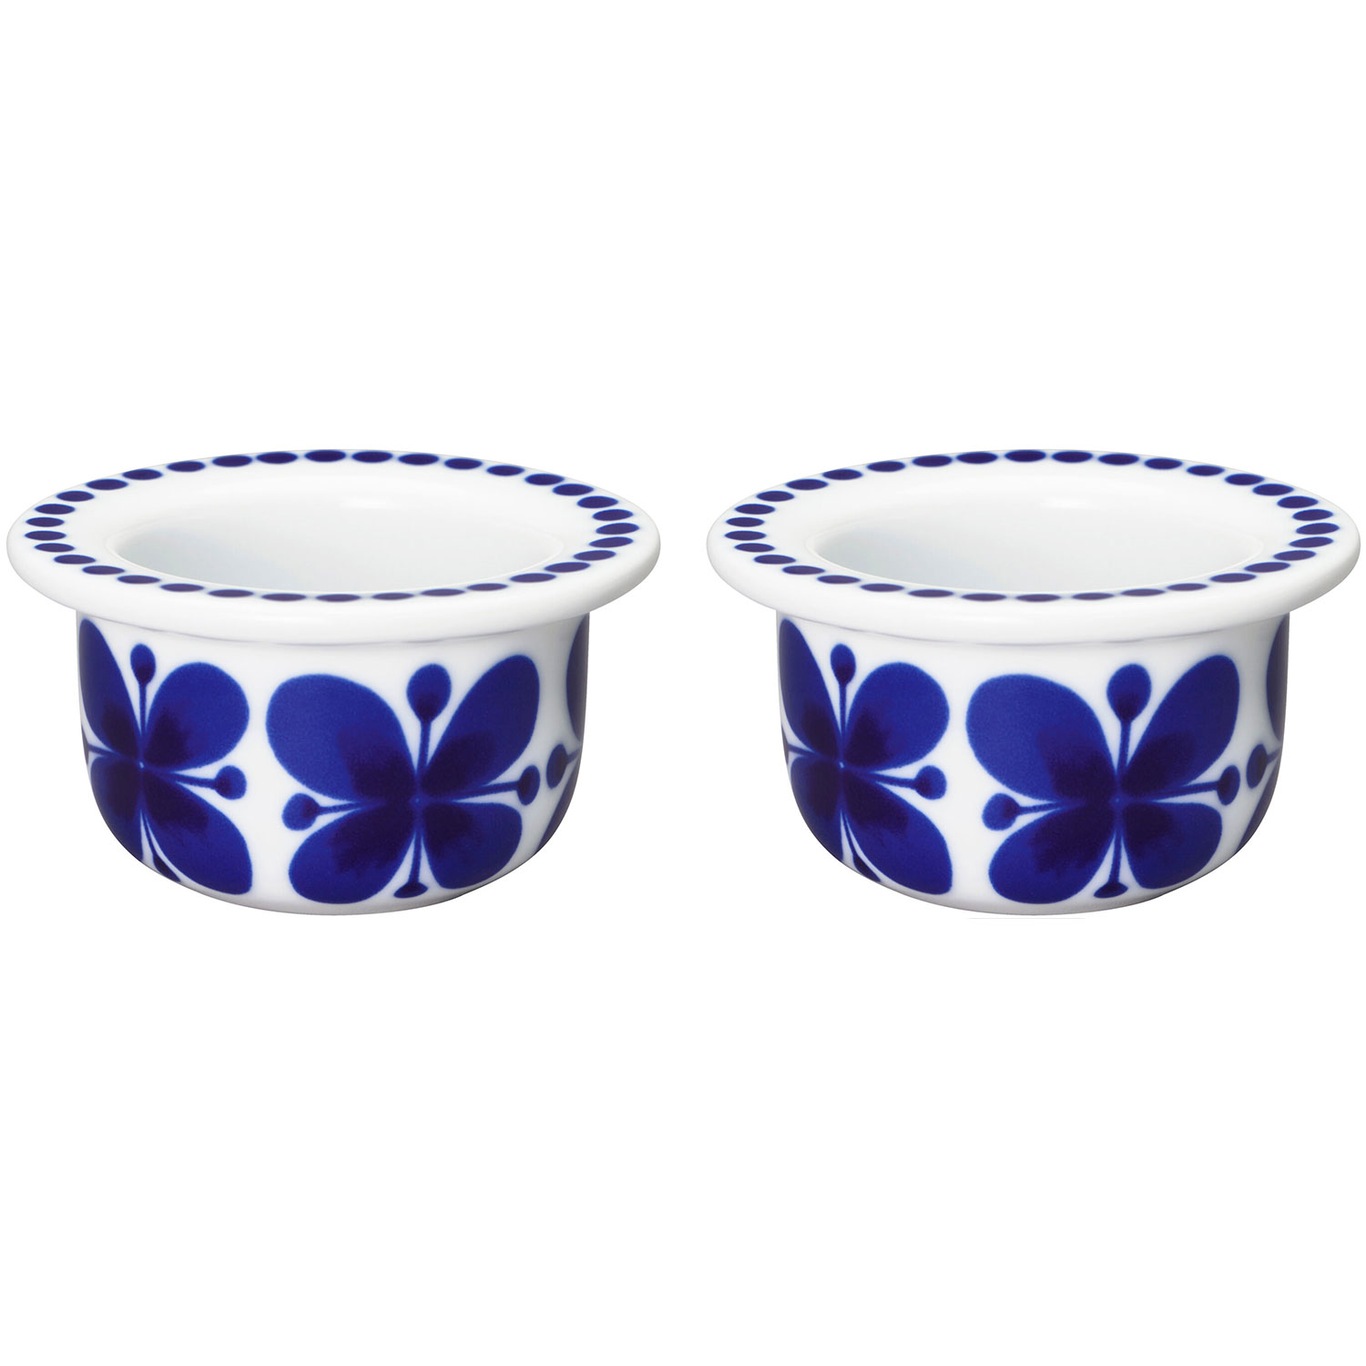 Mon Amie Egg Cups, 2-pack